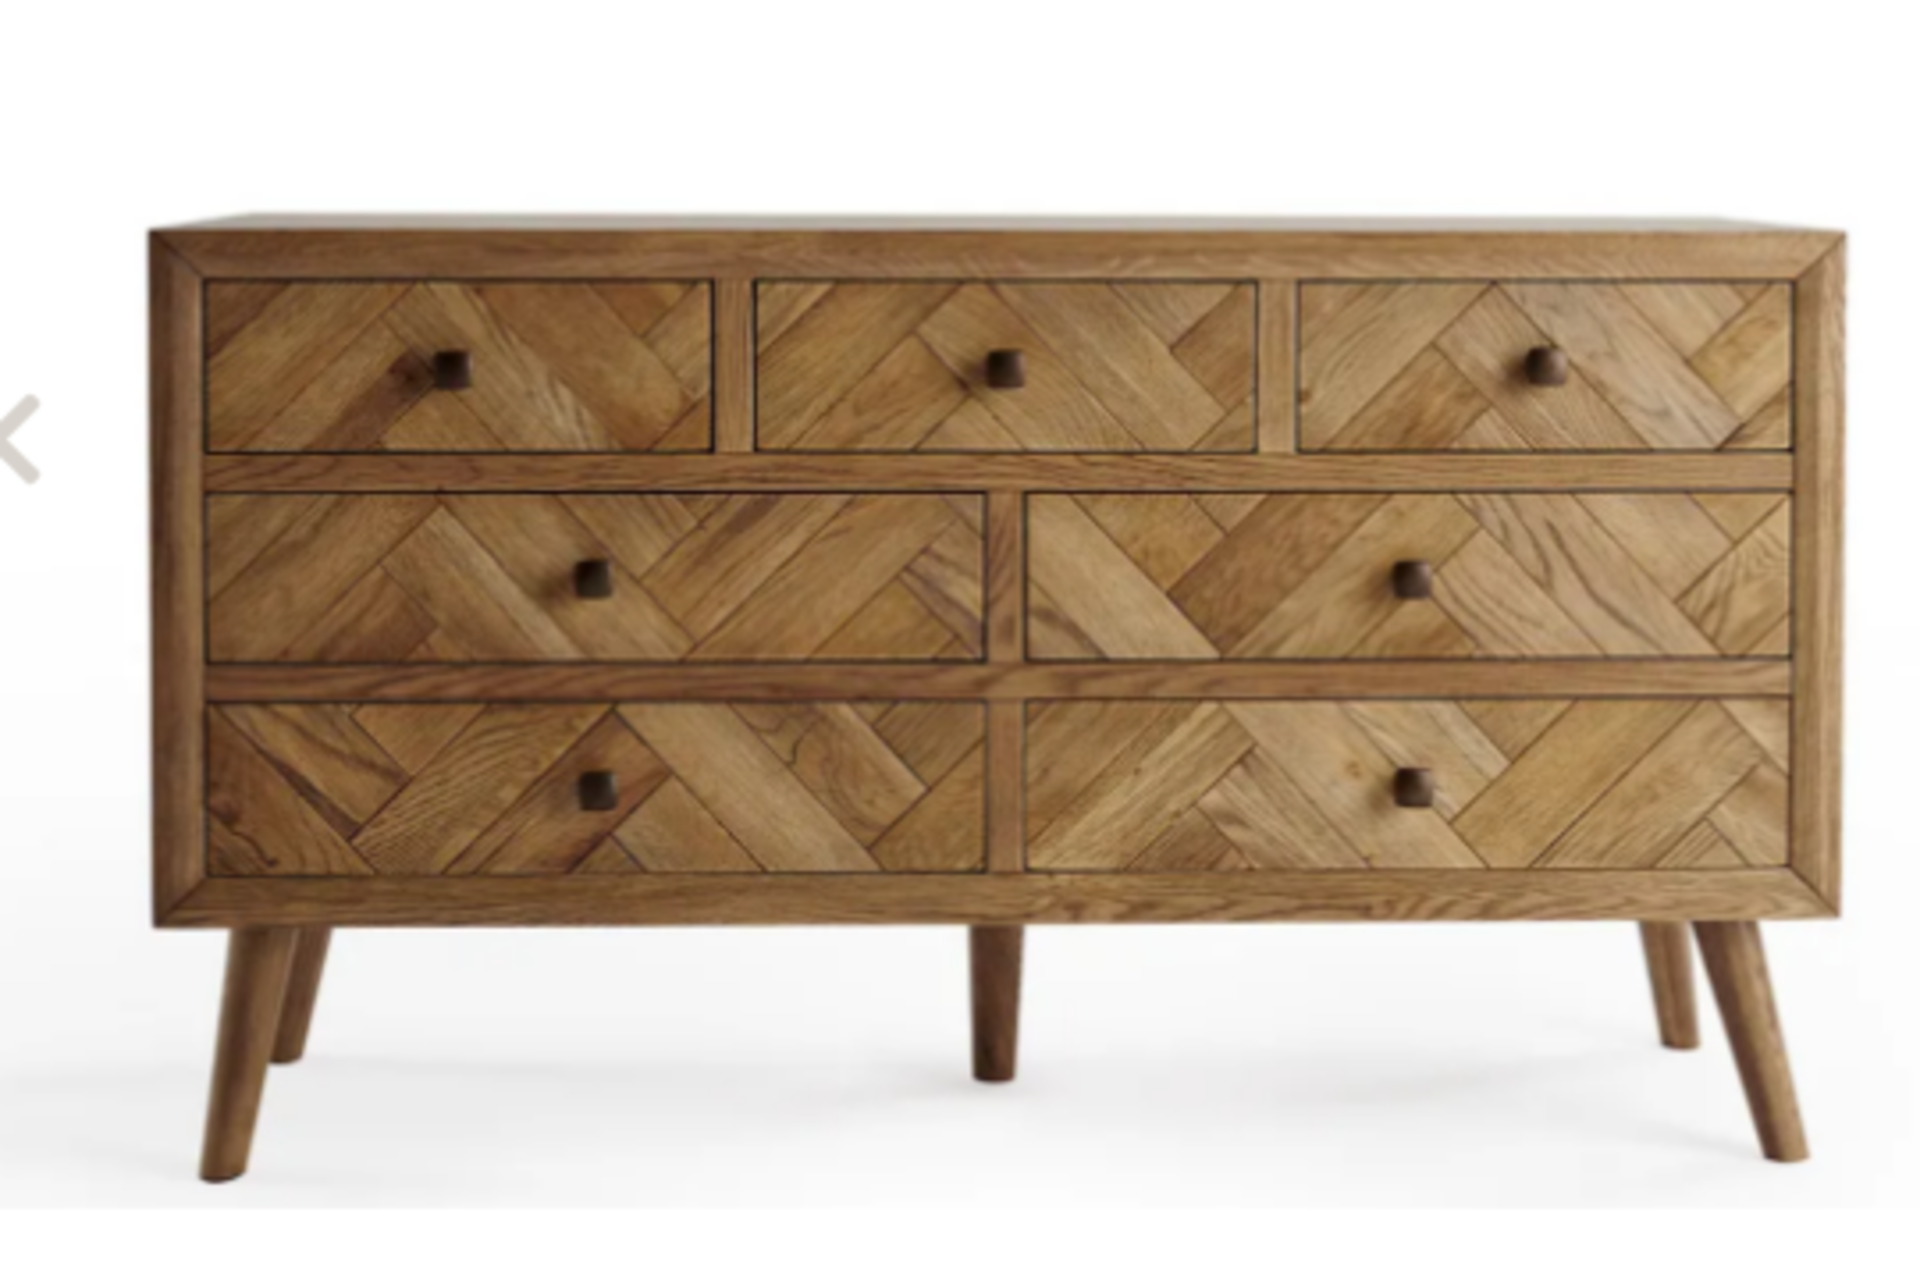 PARQUET Brushed Glazed Solid Oak 7 Drawer Chest. RRP £649.99. With a tactile brushed and glazed ROW7